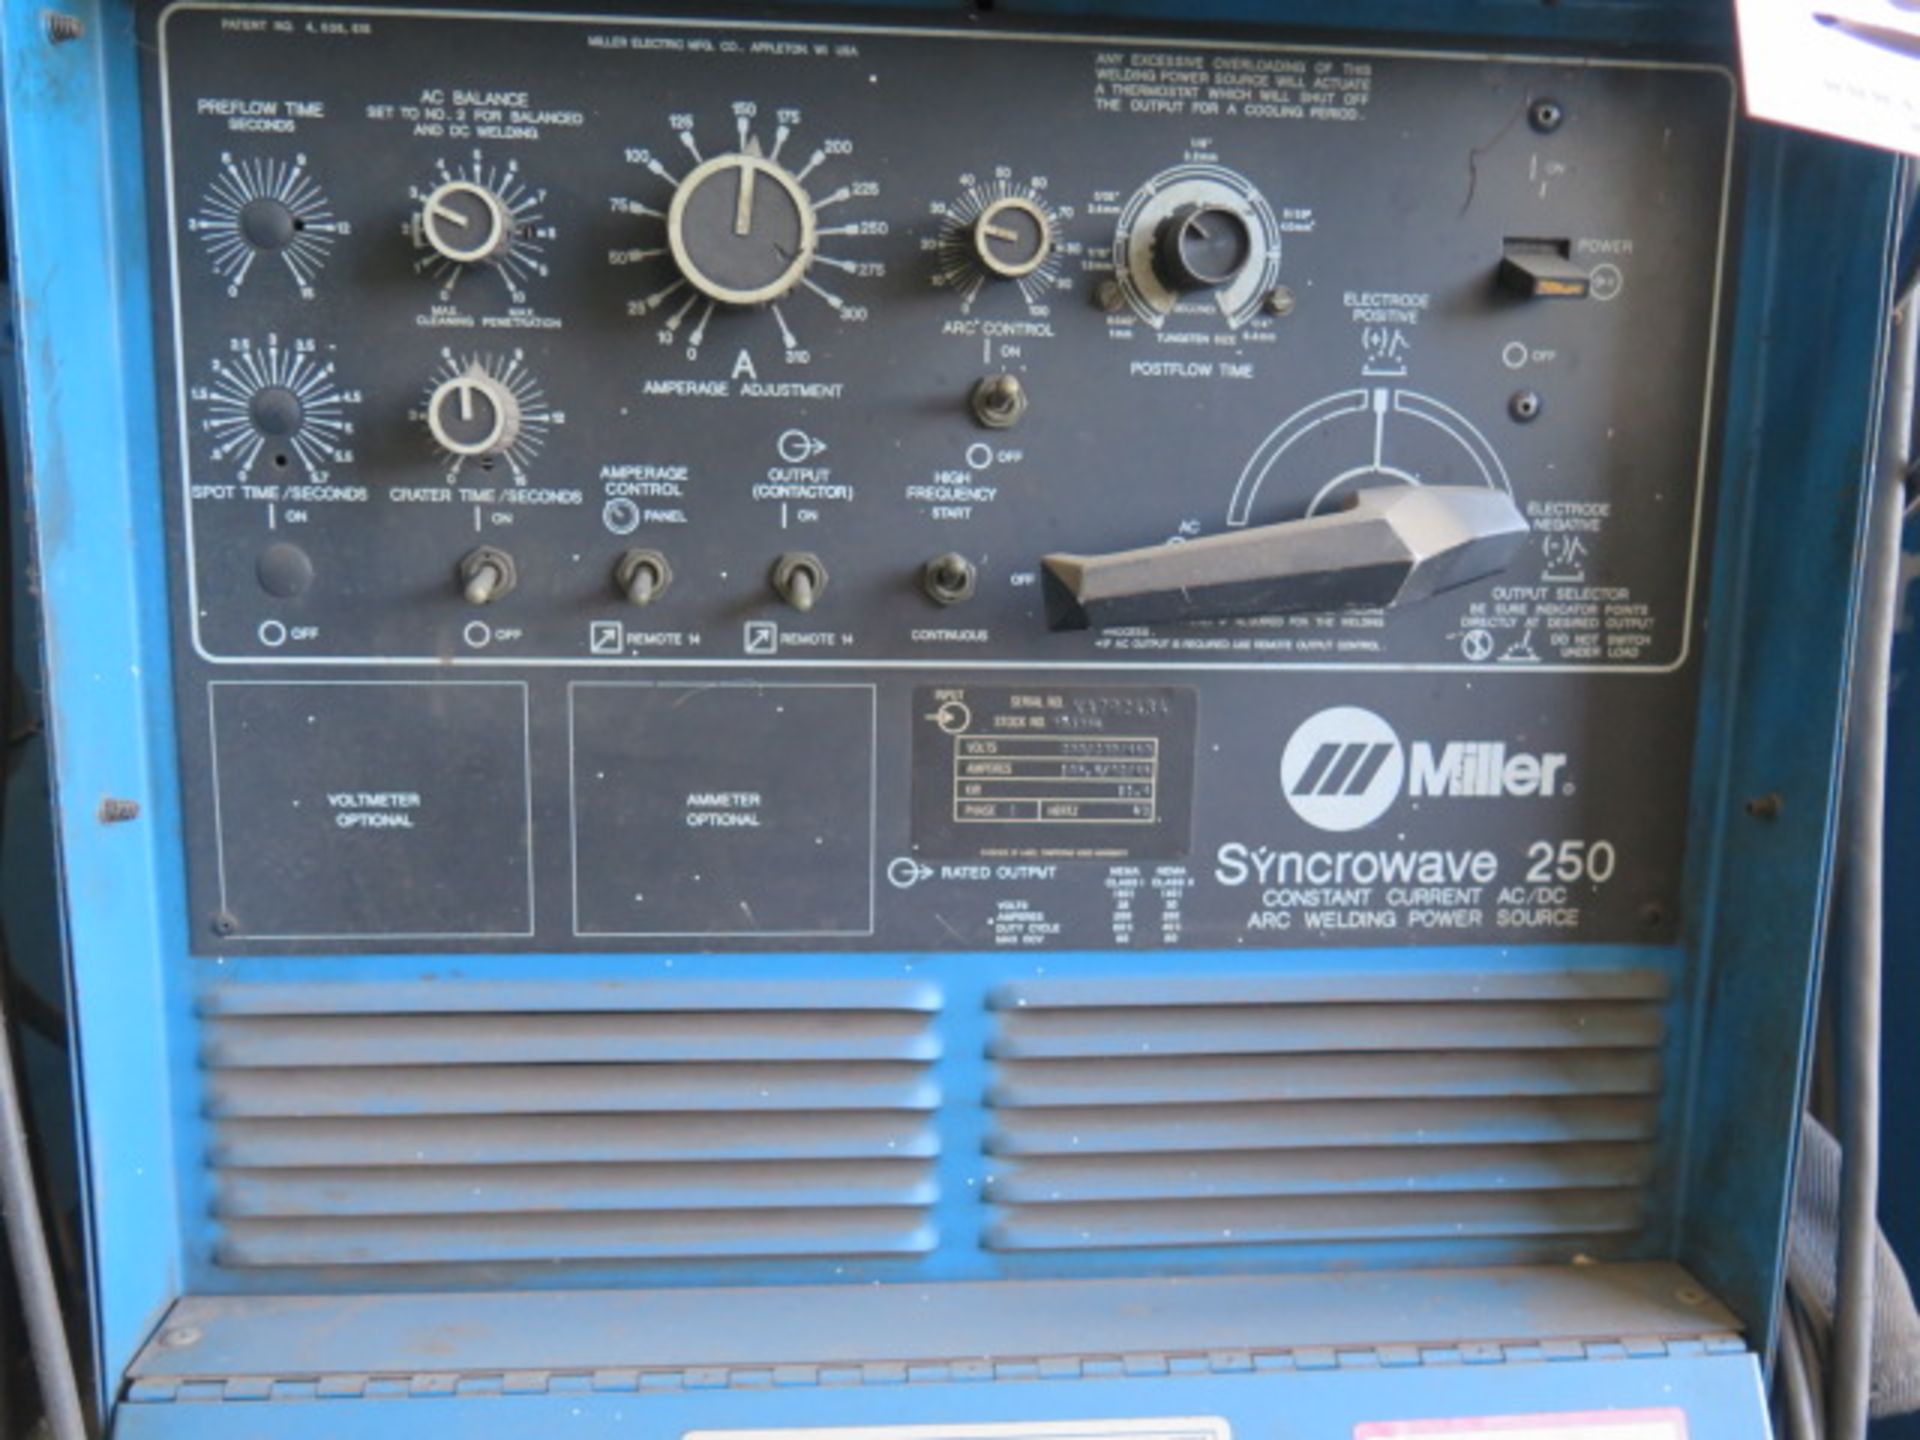 Miller Syncrowave 250 CC-AC/DC Arc Welding Power Source s/n KA792484 w/ Miller Cooler SOLD AS IS - Image 5 of 7